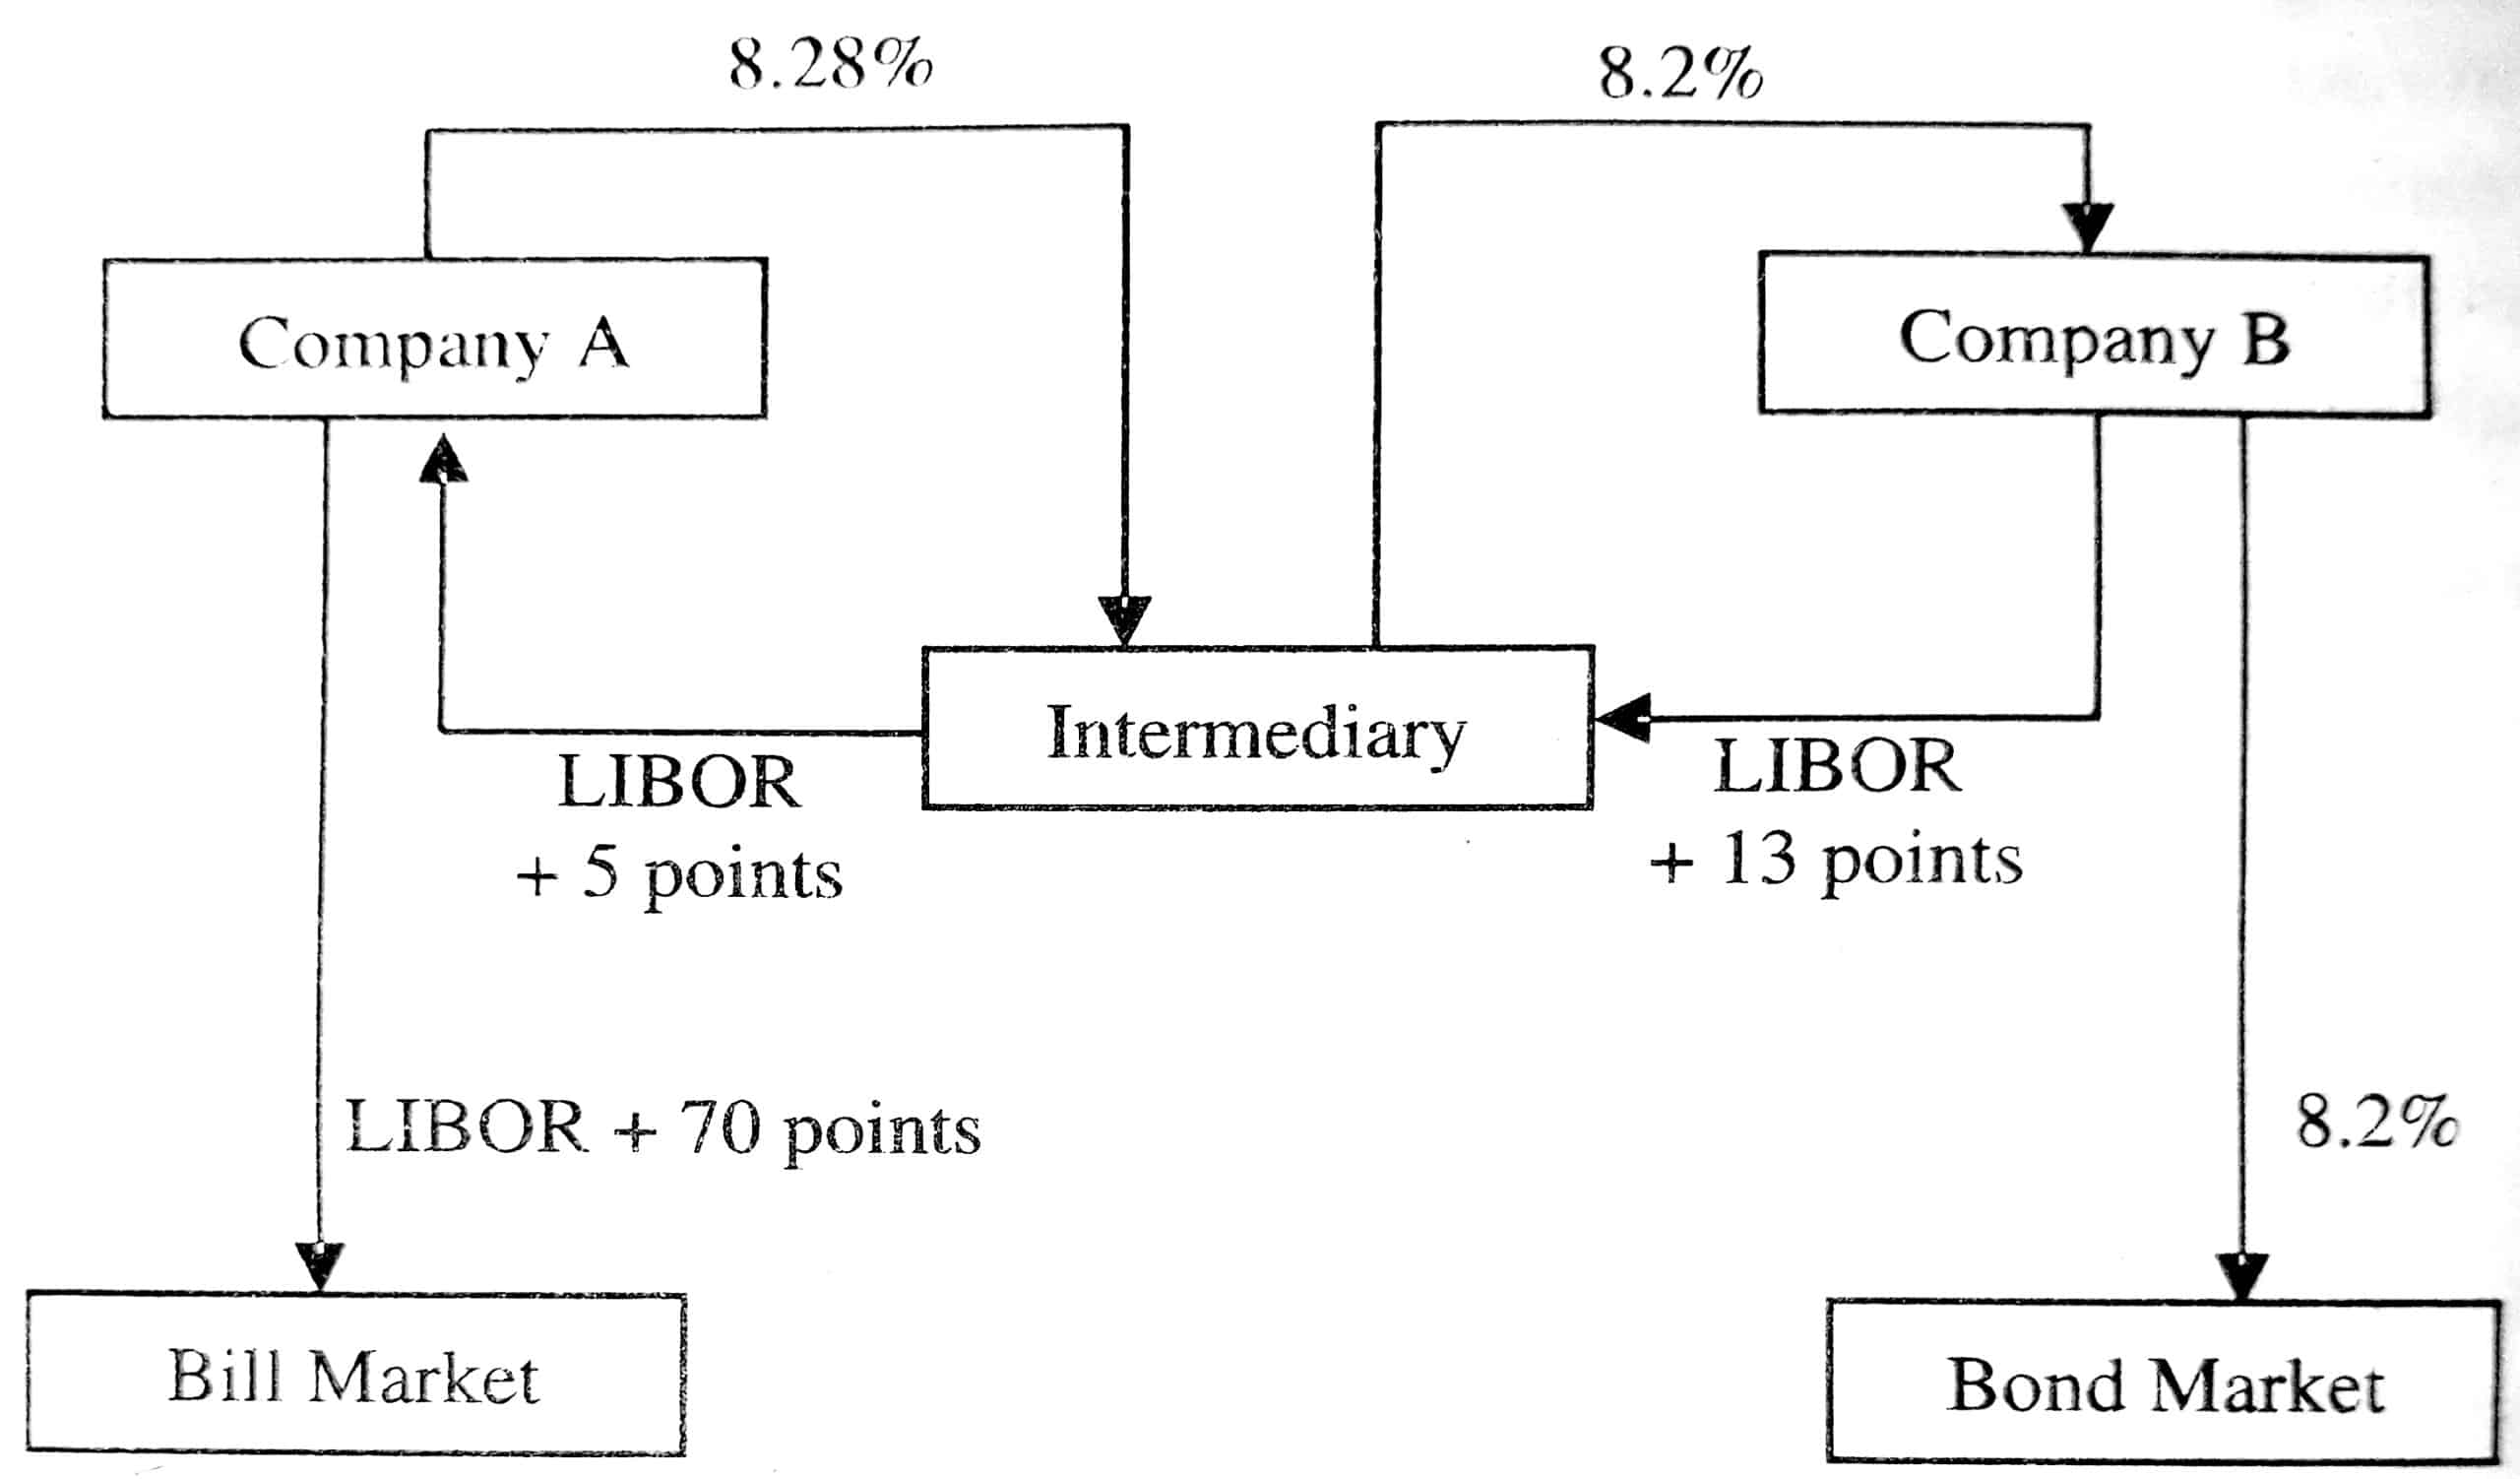 Structure of an Interest Rate Swap through an Intermediary